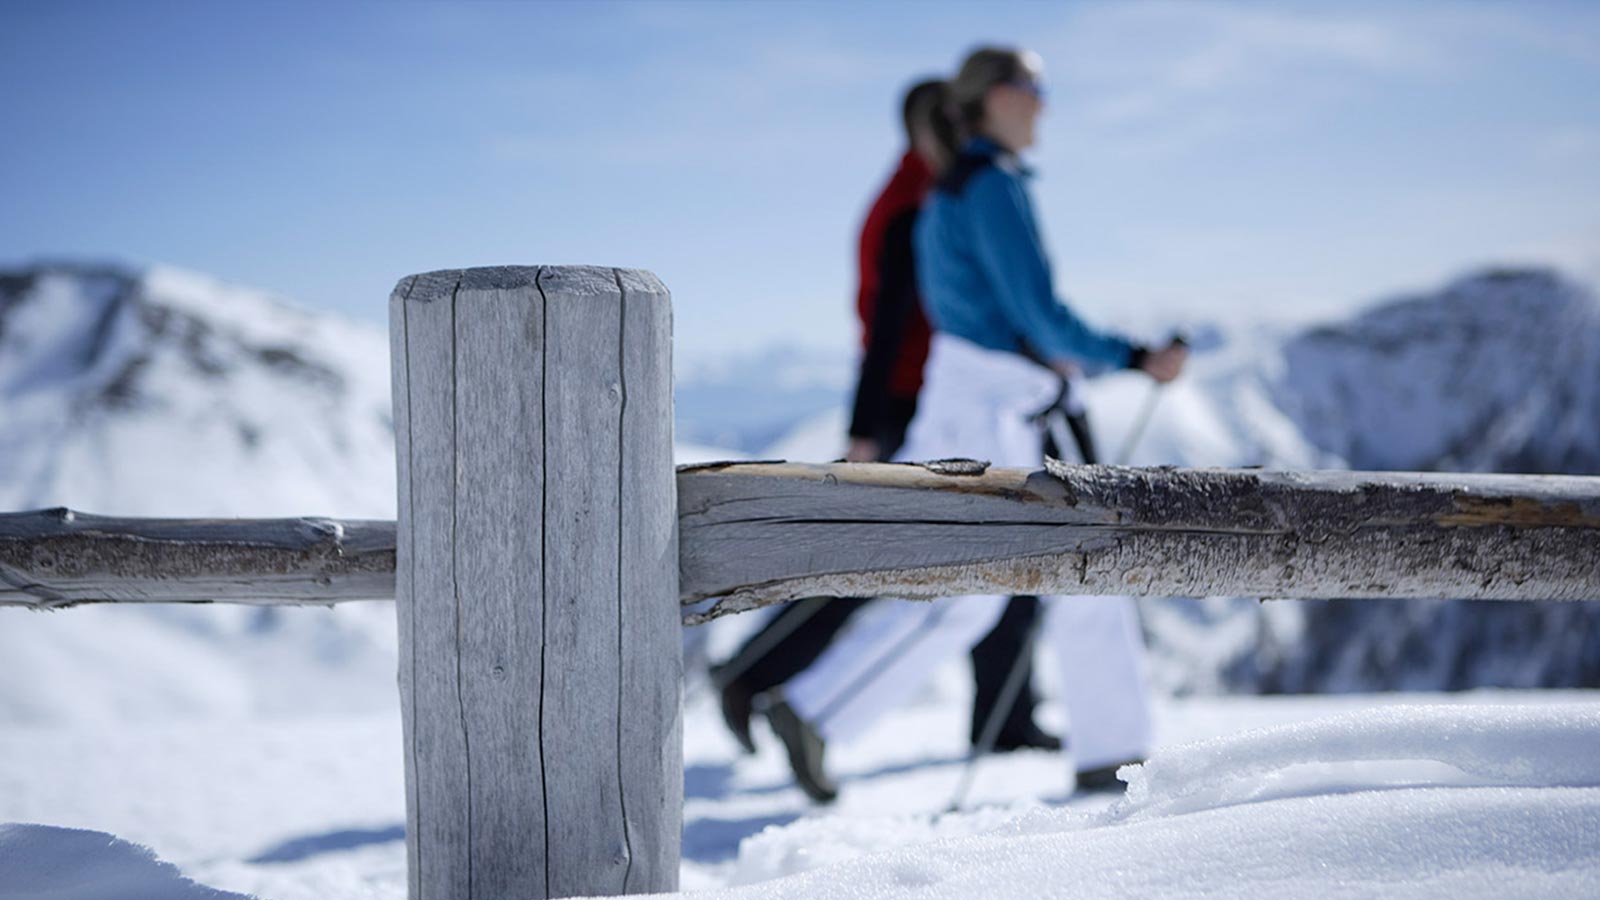 Detail of a fence with a couple walking in the snow in the background